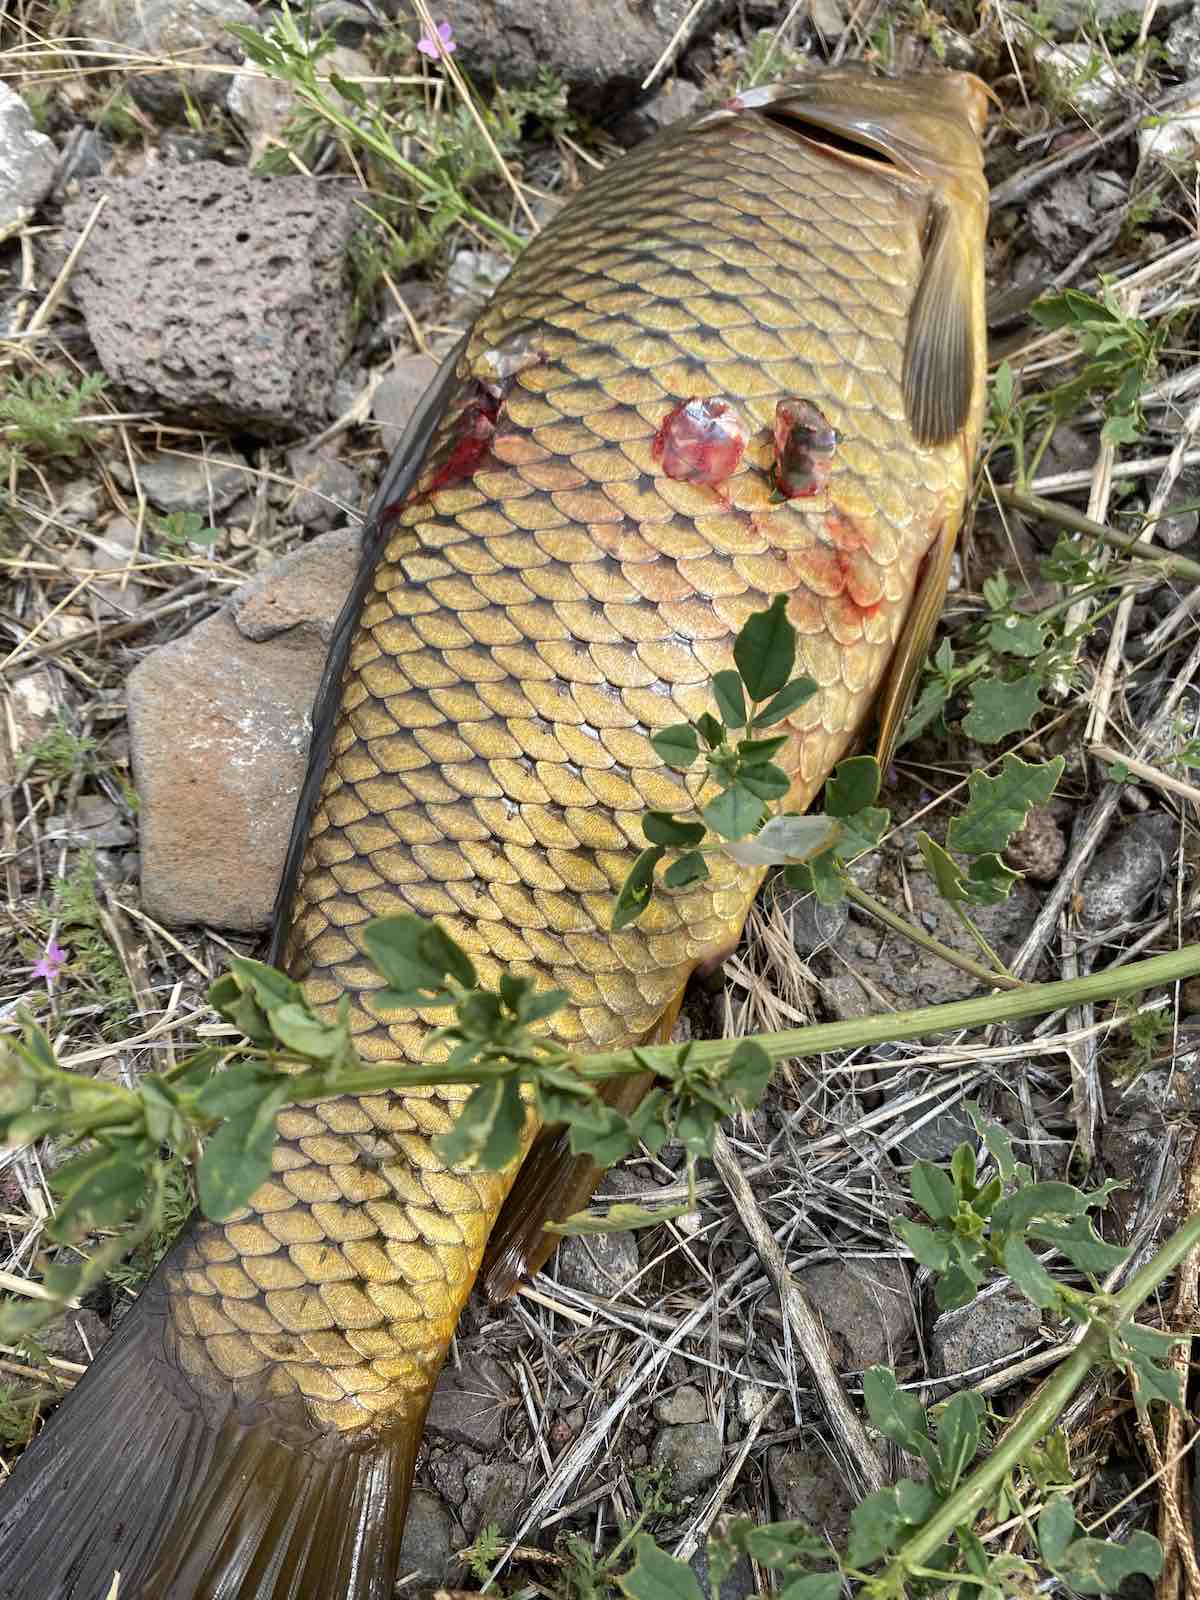 Fat common carp shot with bow and arrow